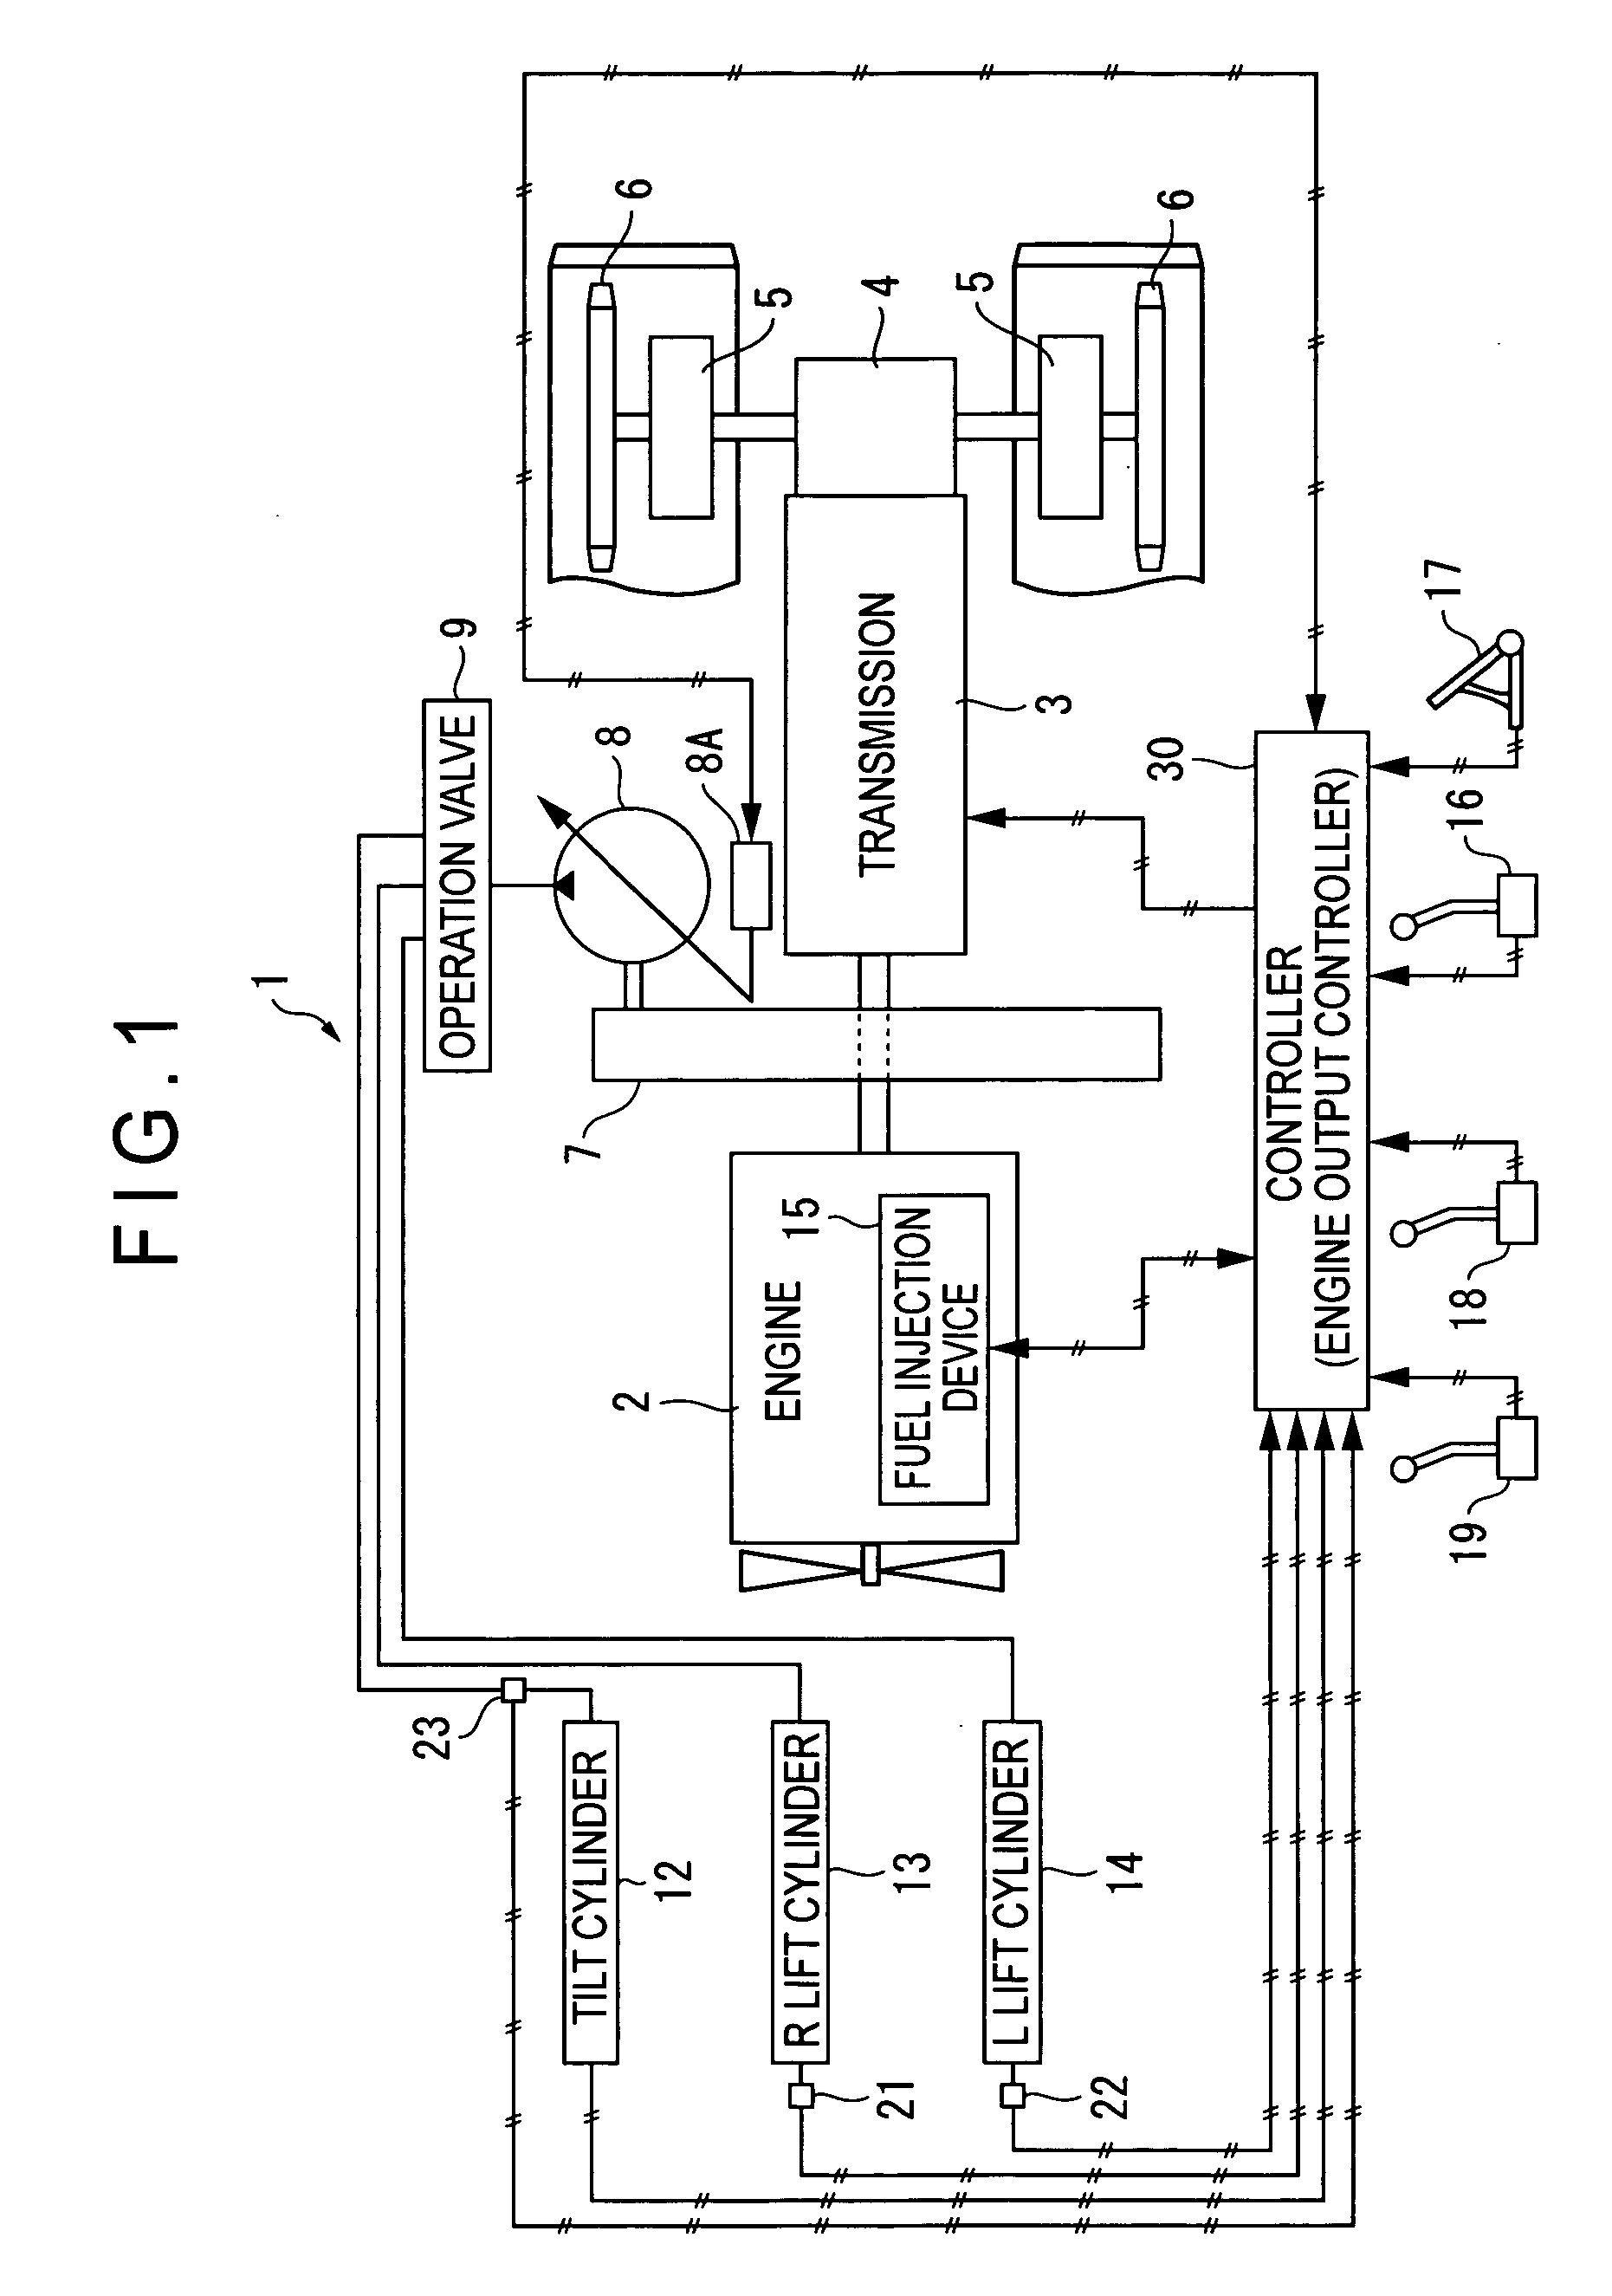 Engine output controller